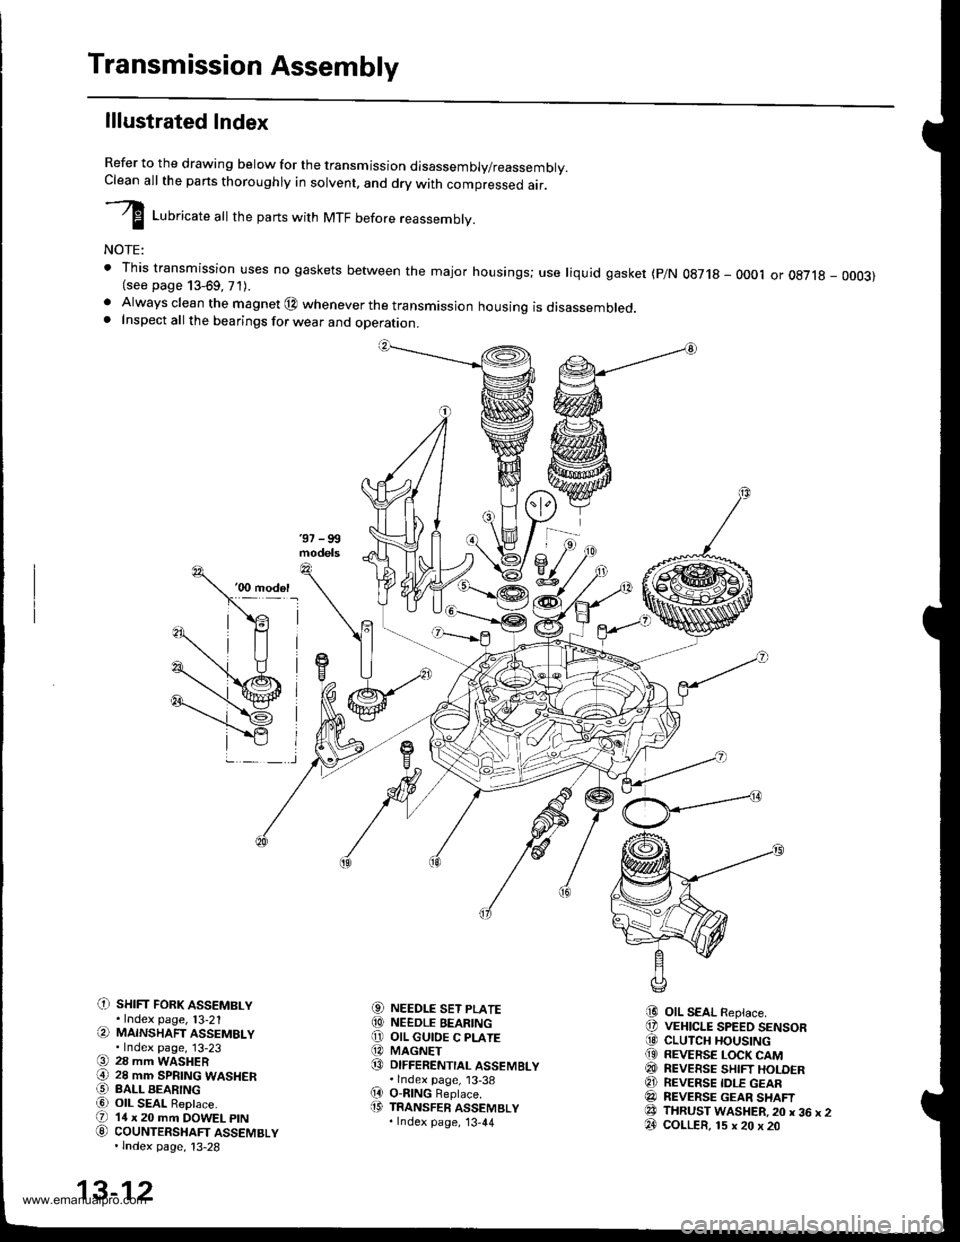 HONDA CR-V 1998 RD1-RD3 / 1.G Workshop Manual 
Transmission Assembly
lllustrated Index
Refer to the drawing below for the transmission disassembly/reassembly.Clean all the pans thoroughly in solvent, and drv with comoressed air.
I LuUri""r" utt t